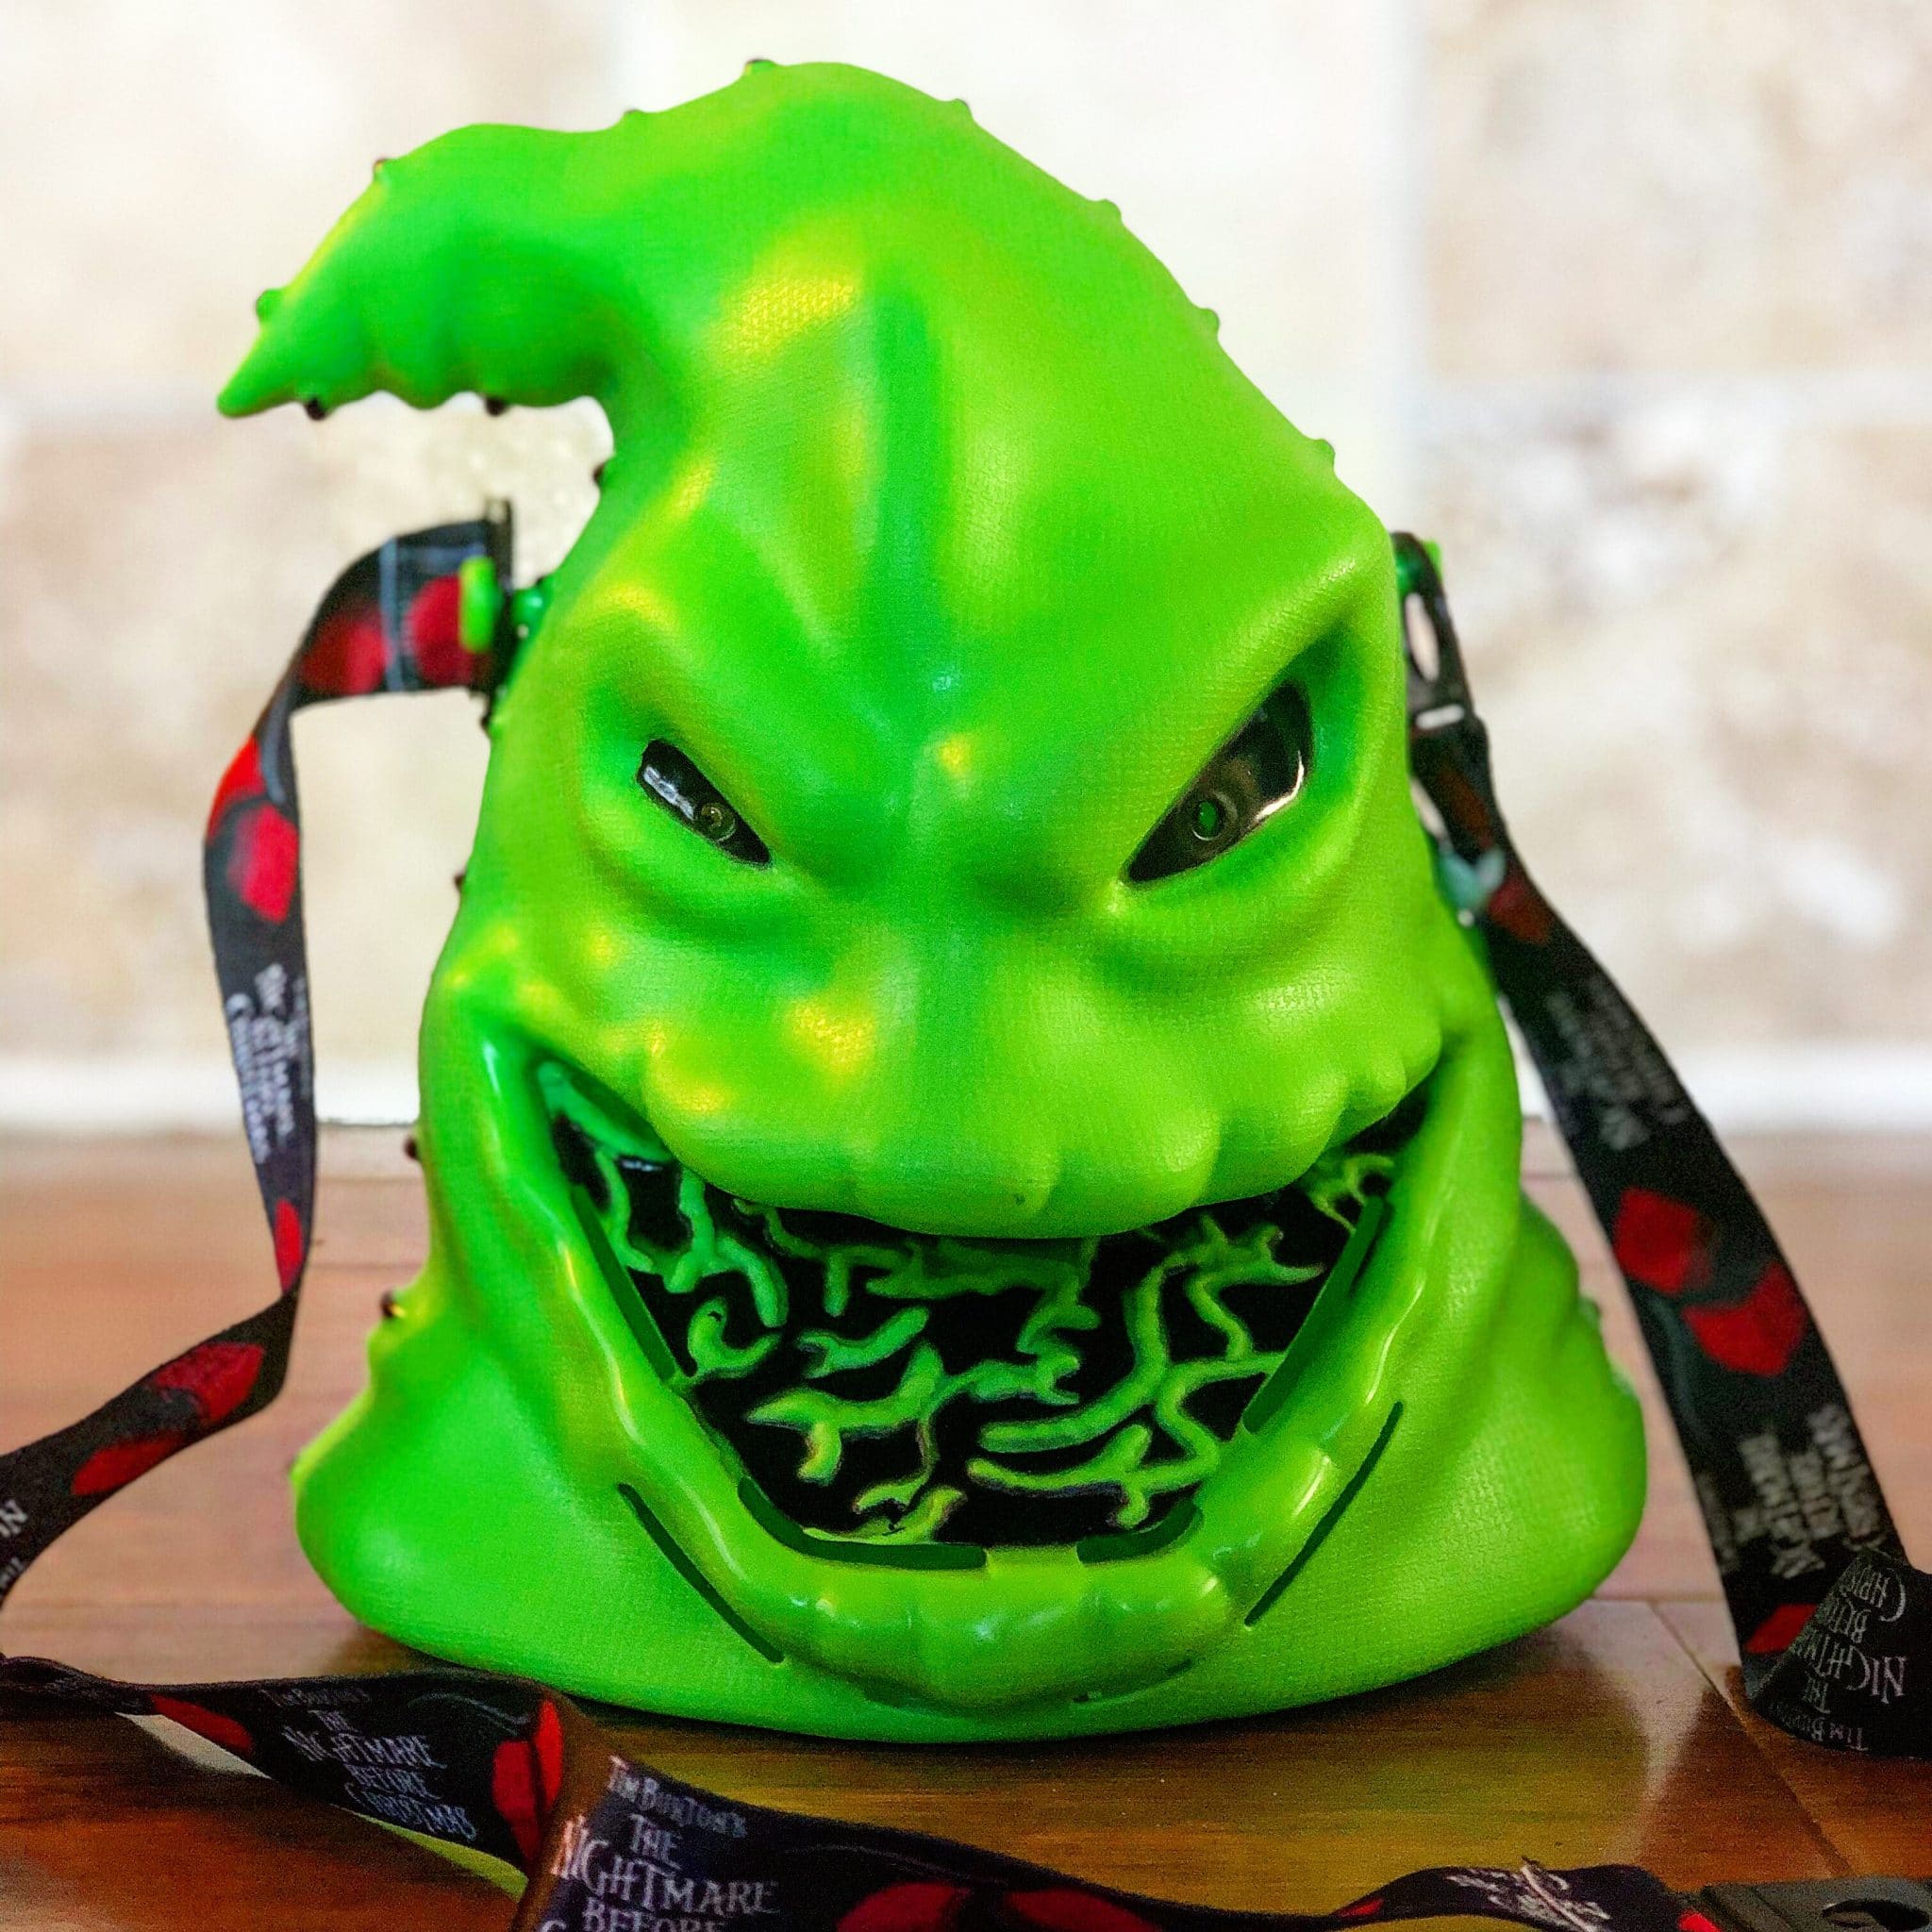 Oogie Boogie Popcorn Bucket at the 2019 Mickey’s Not So Scary Halloween Party in the Magic Kingdom